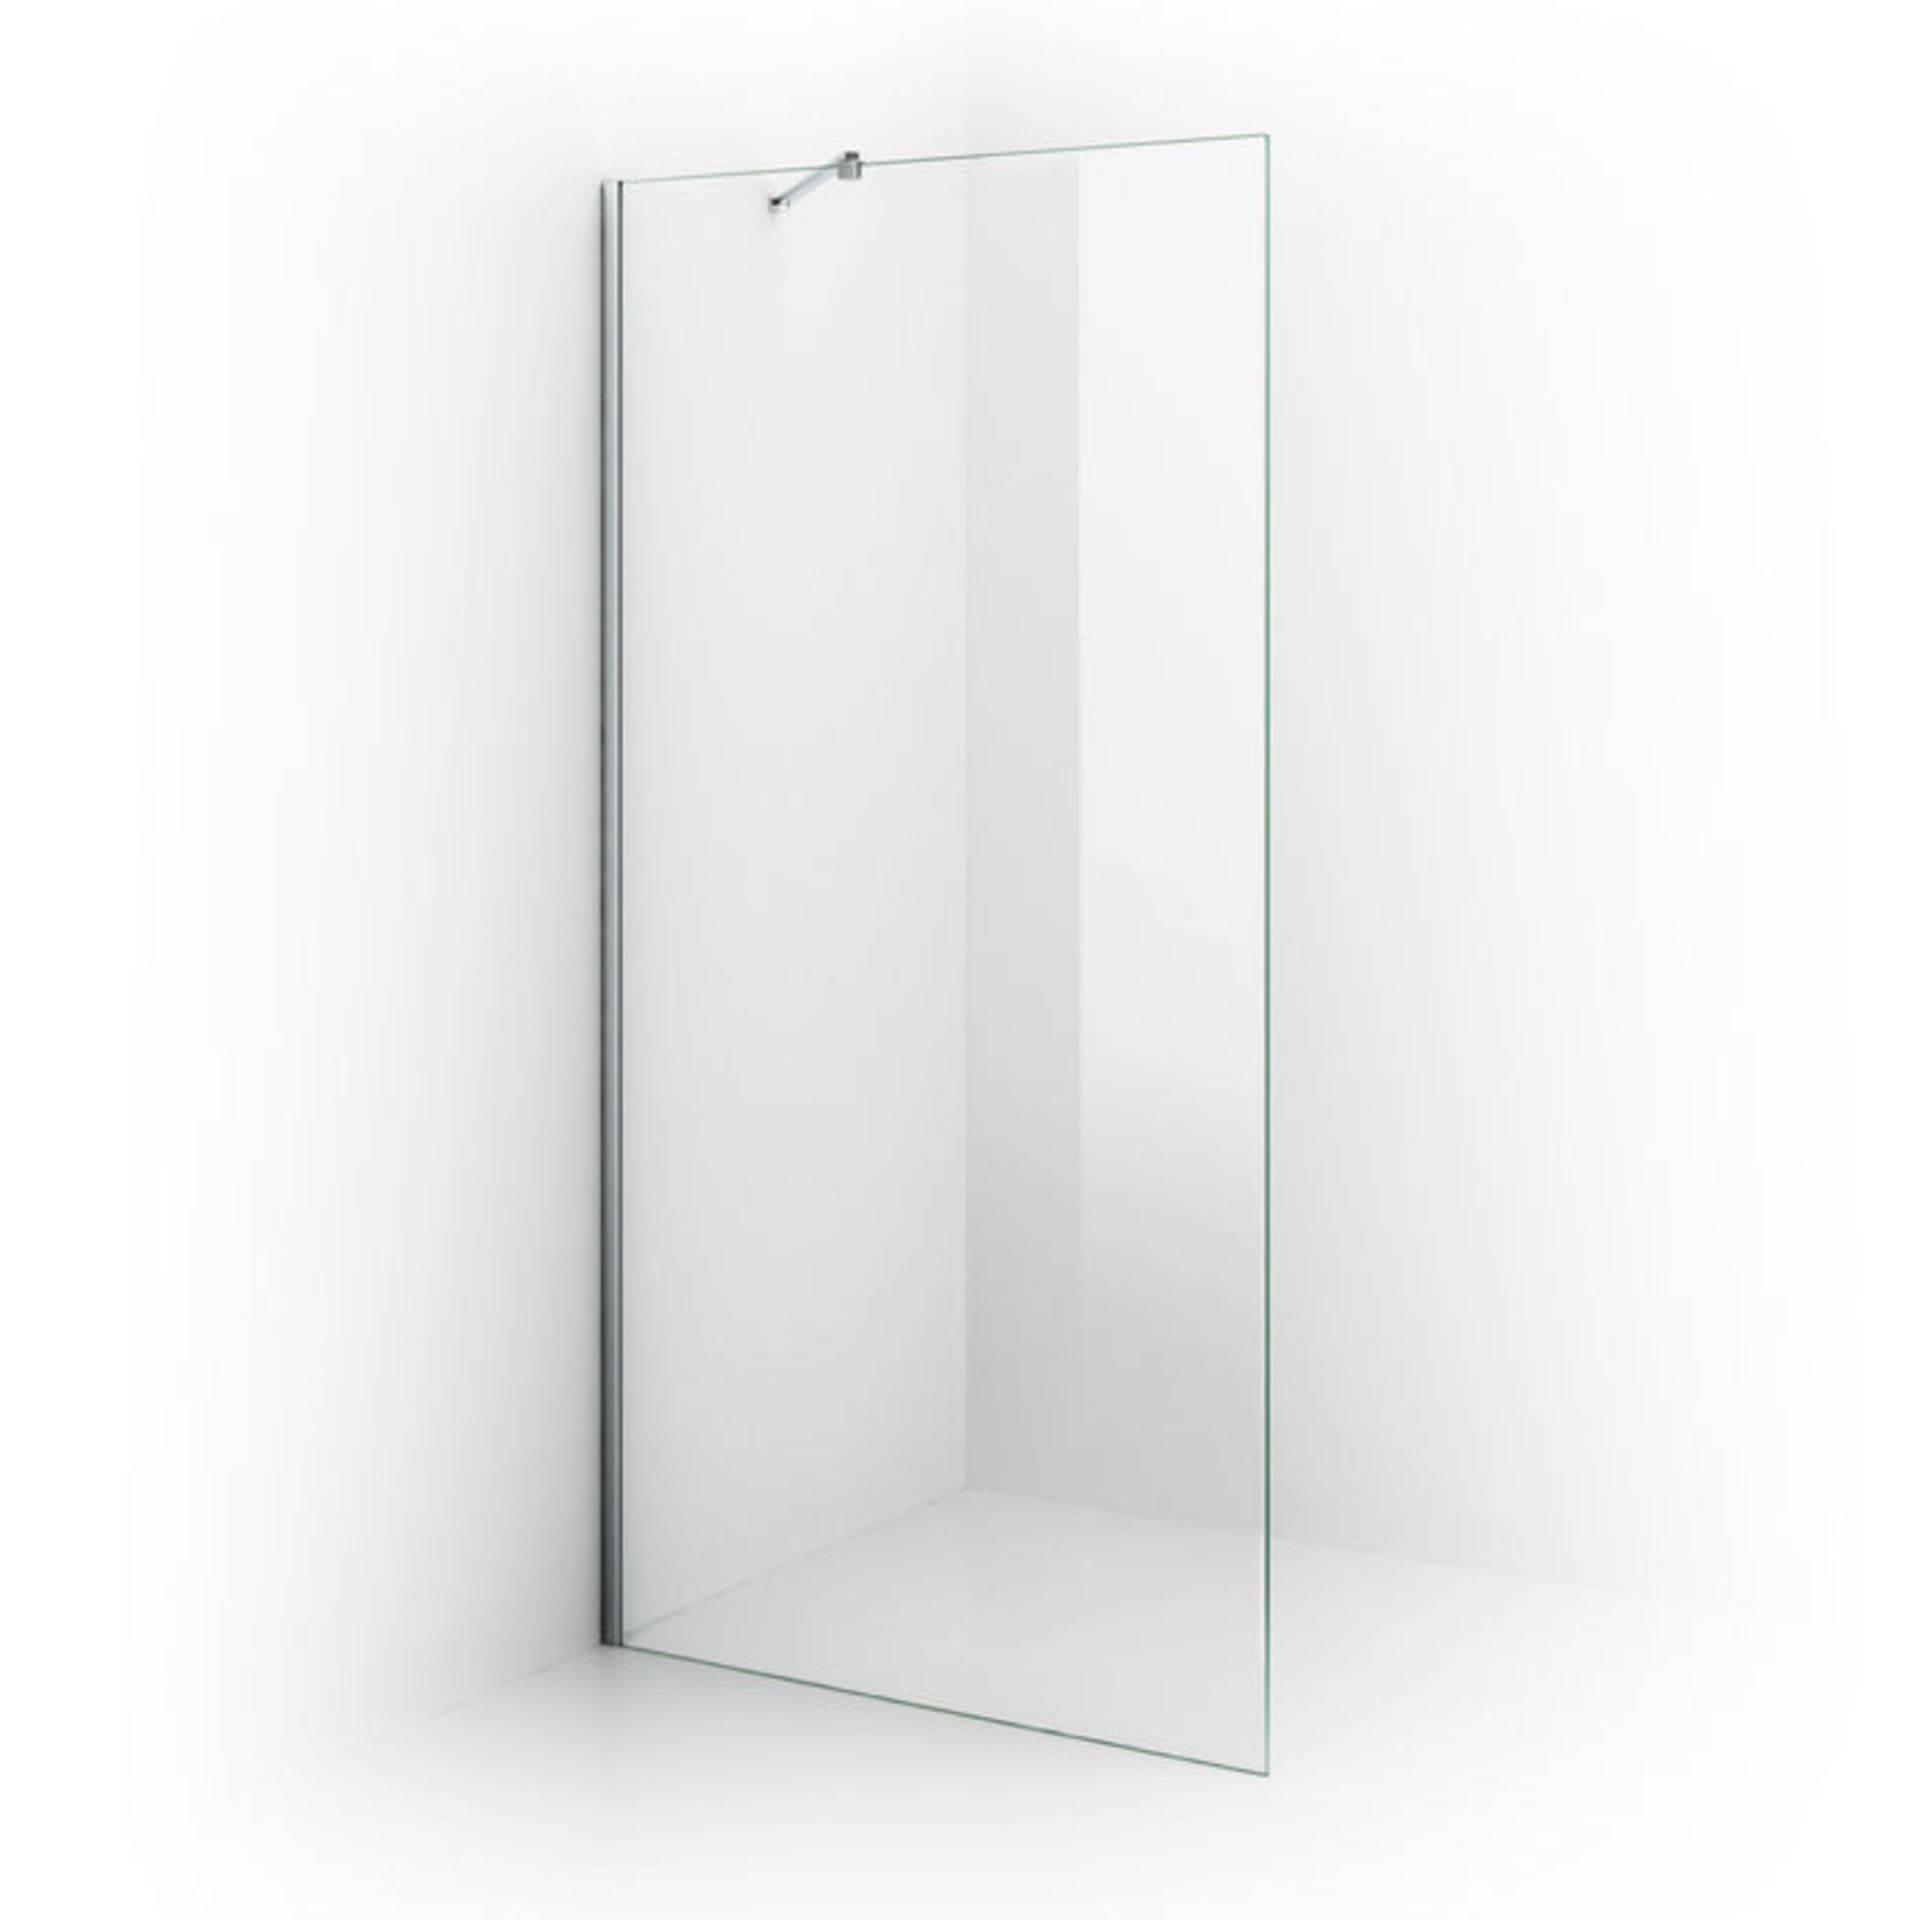 (P291) 900mm - 8mm - Premium EasyClean Wetroom Panel. RRP £139.99. 8mm EasyClean glass - Our glass - Image 2 of 3